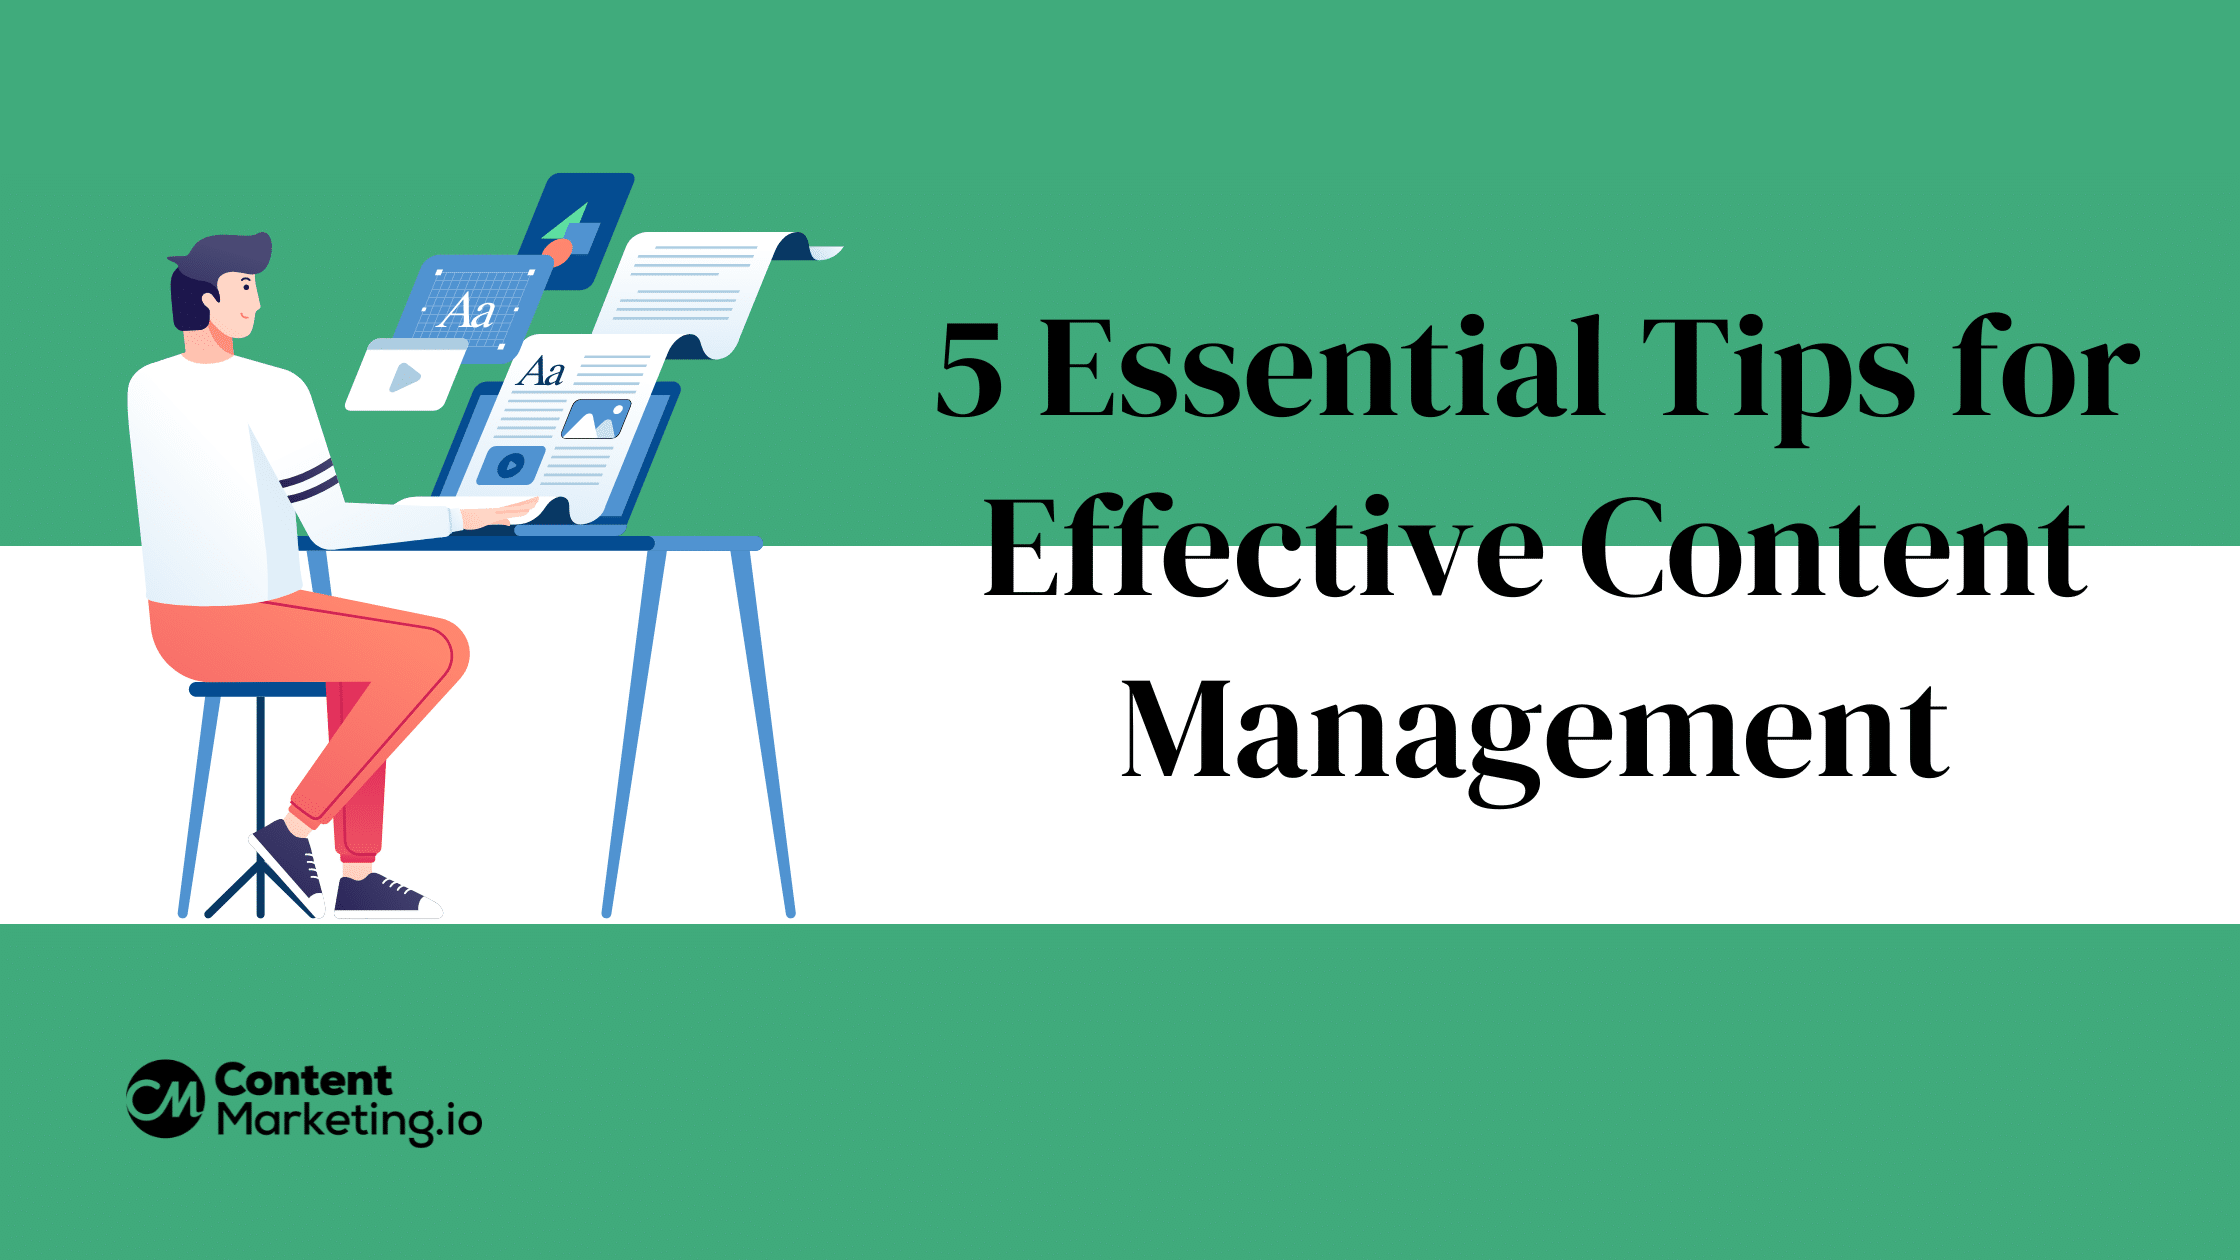 5 Essential Tips for Effective Content Management